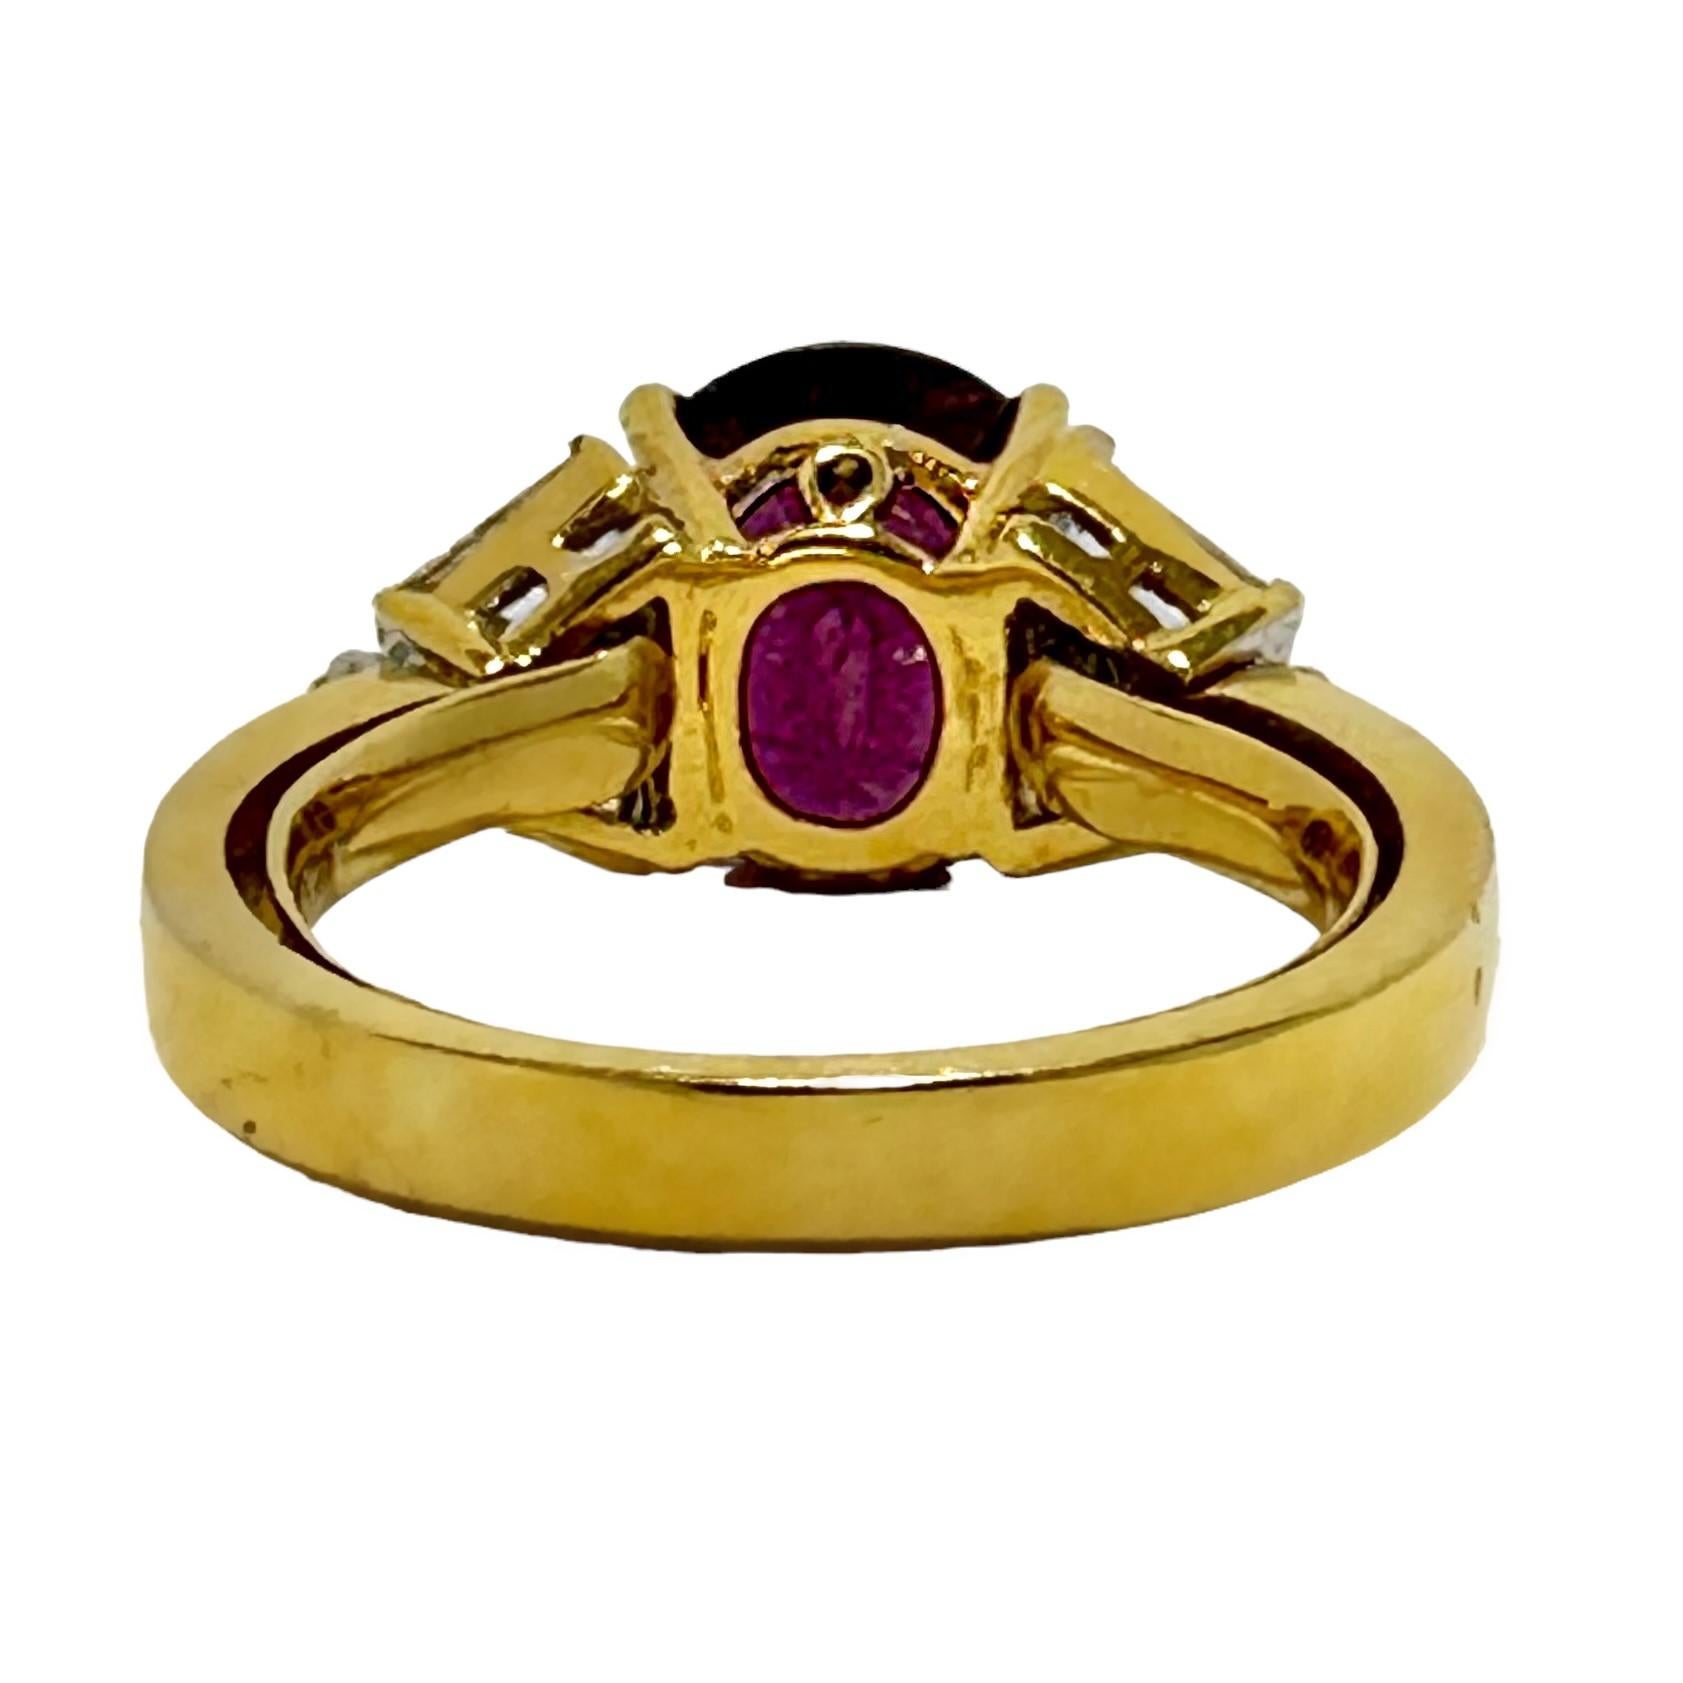 Women's 18k Yellow Gold Ring with 4.76ct Red Wine Colored, Oval Shaped Garnet & Diamonds For Sale